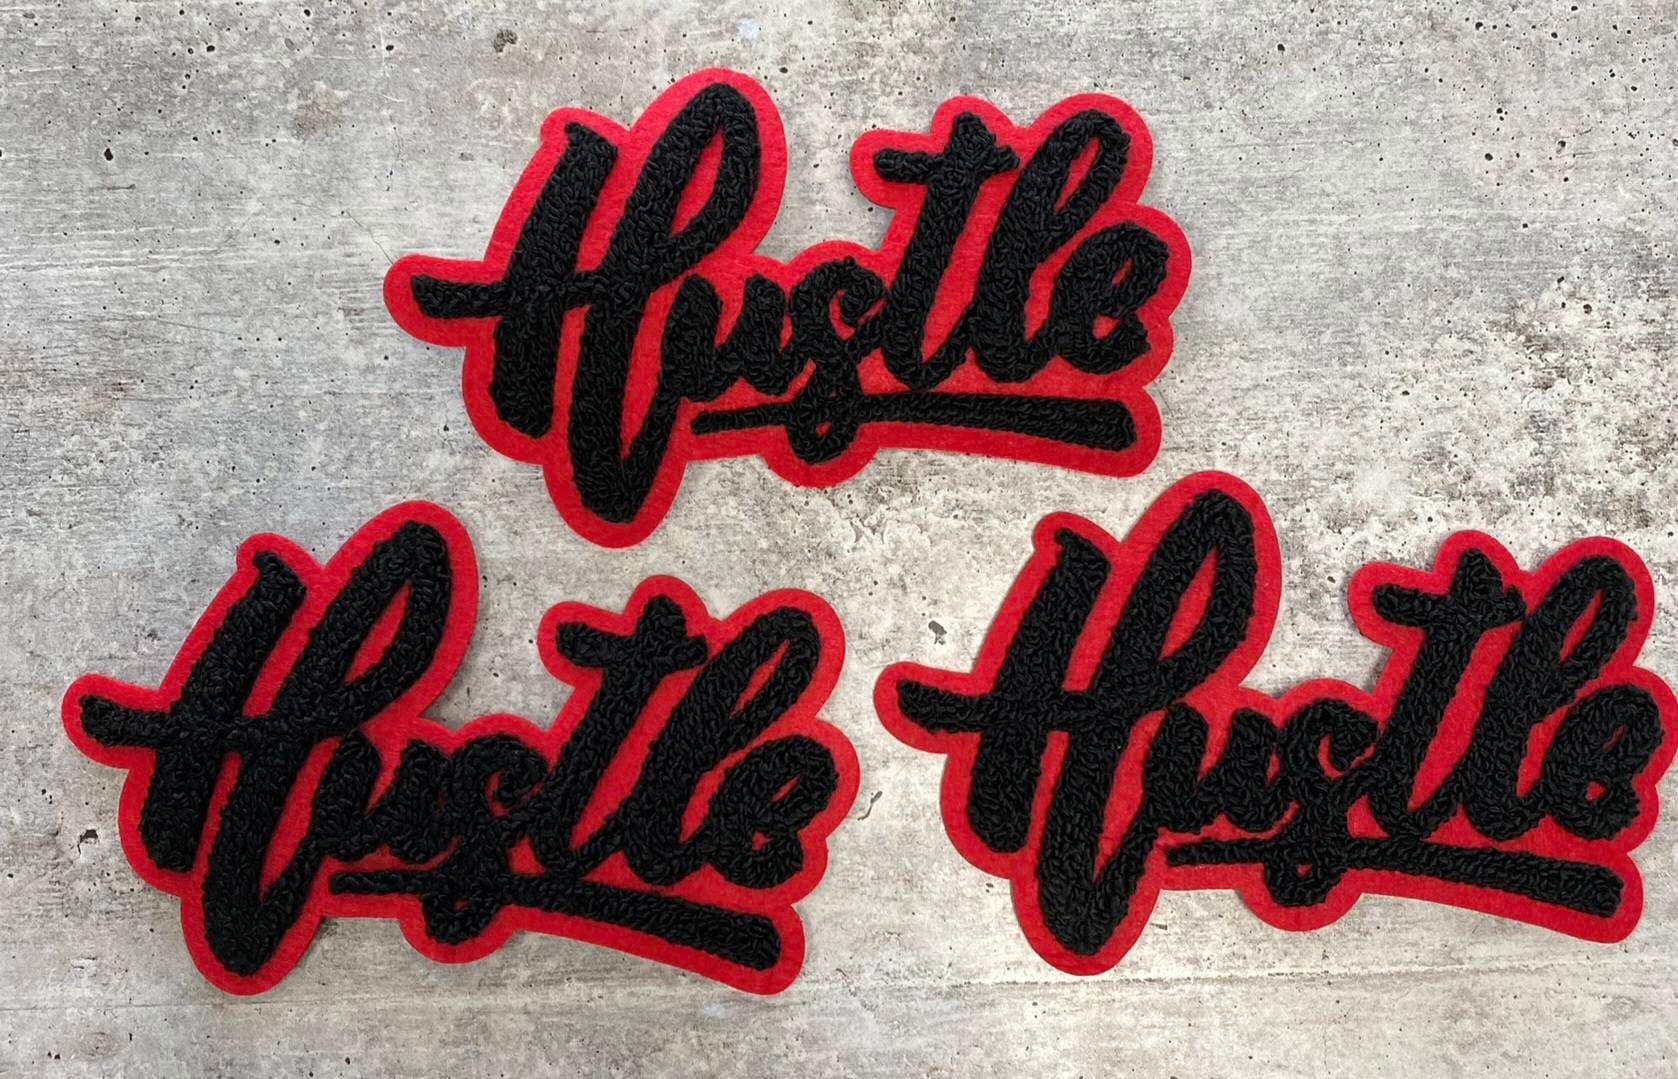 New SIZE, 1-pc Black & Red "Hustle" Chenille Patch (iron-on) Size 6"x4", Varsity Patch for Denim, Camos, Hoodies, Small Patch